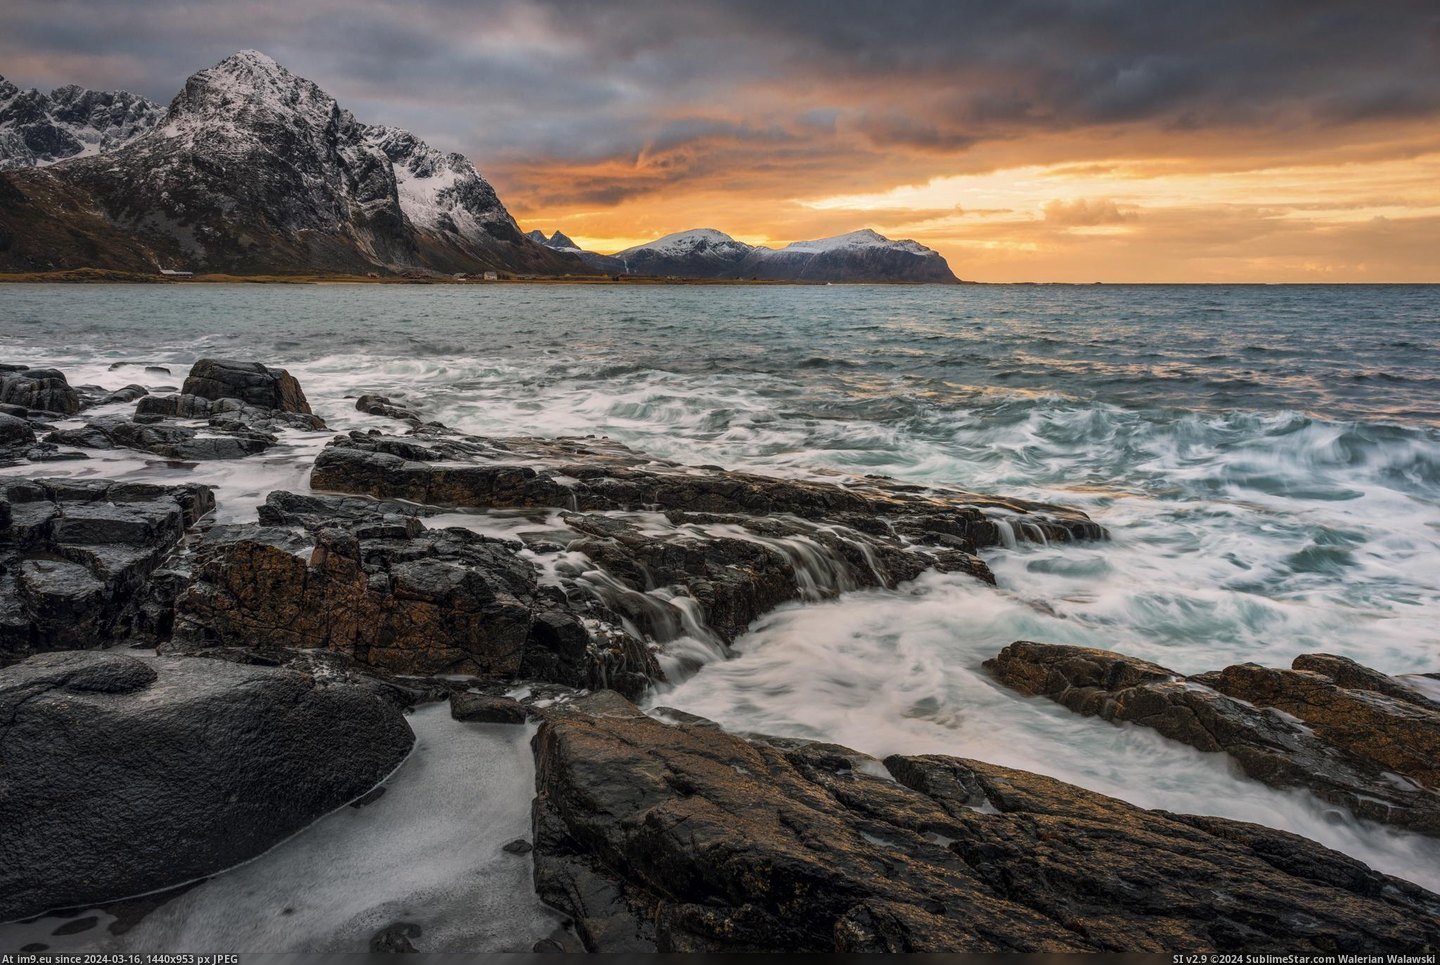 #Sunset #Winter #Wave #2048x1367 #Action #Norway [Earthporn]  A winter sunset with some of wave action near Ramberg, Norway [2048x1367] Pic. (Image of album My r/EARTHPORN favs))